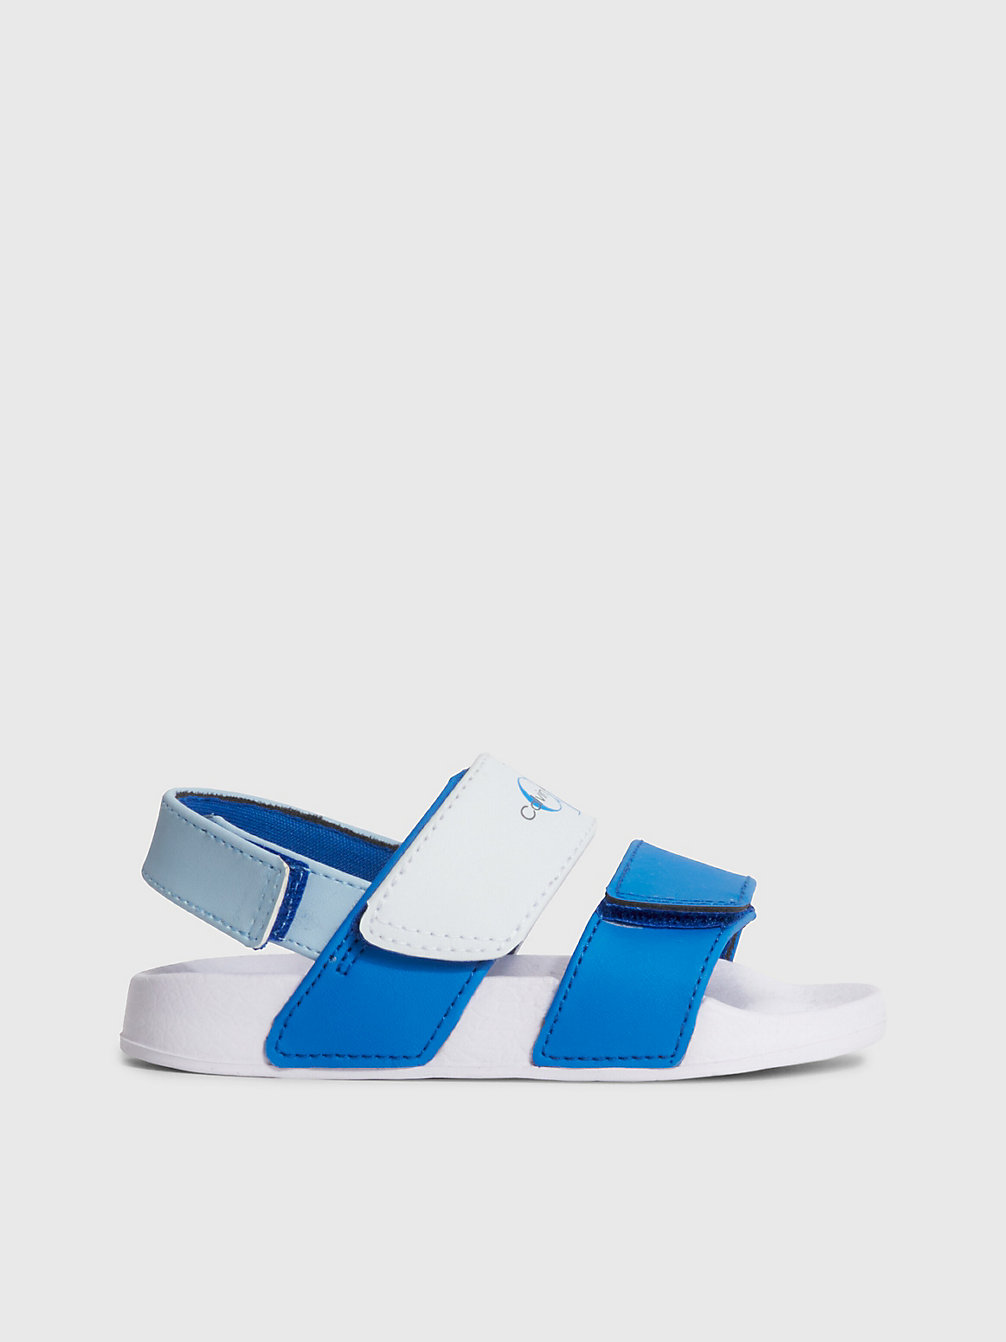 ROYAL/WHITE Toddlers And Kids Sandals undefined boys Calvin Klein